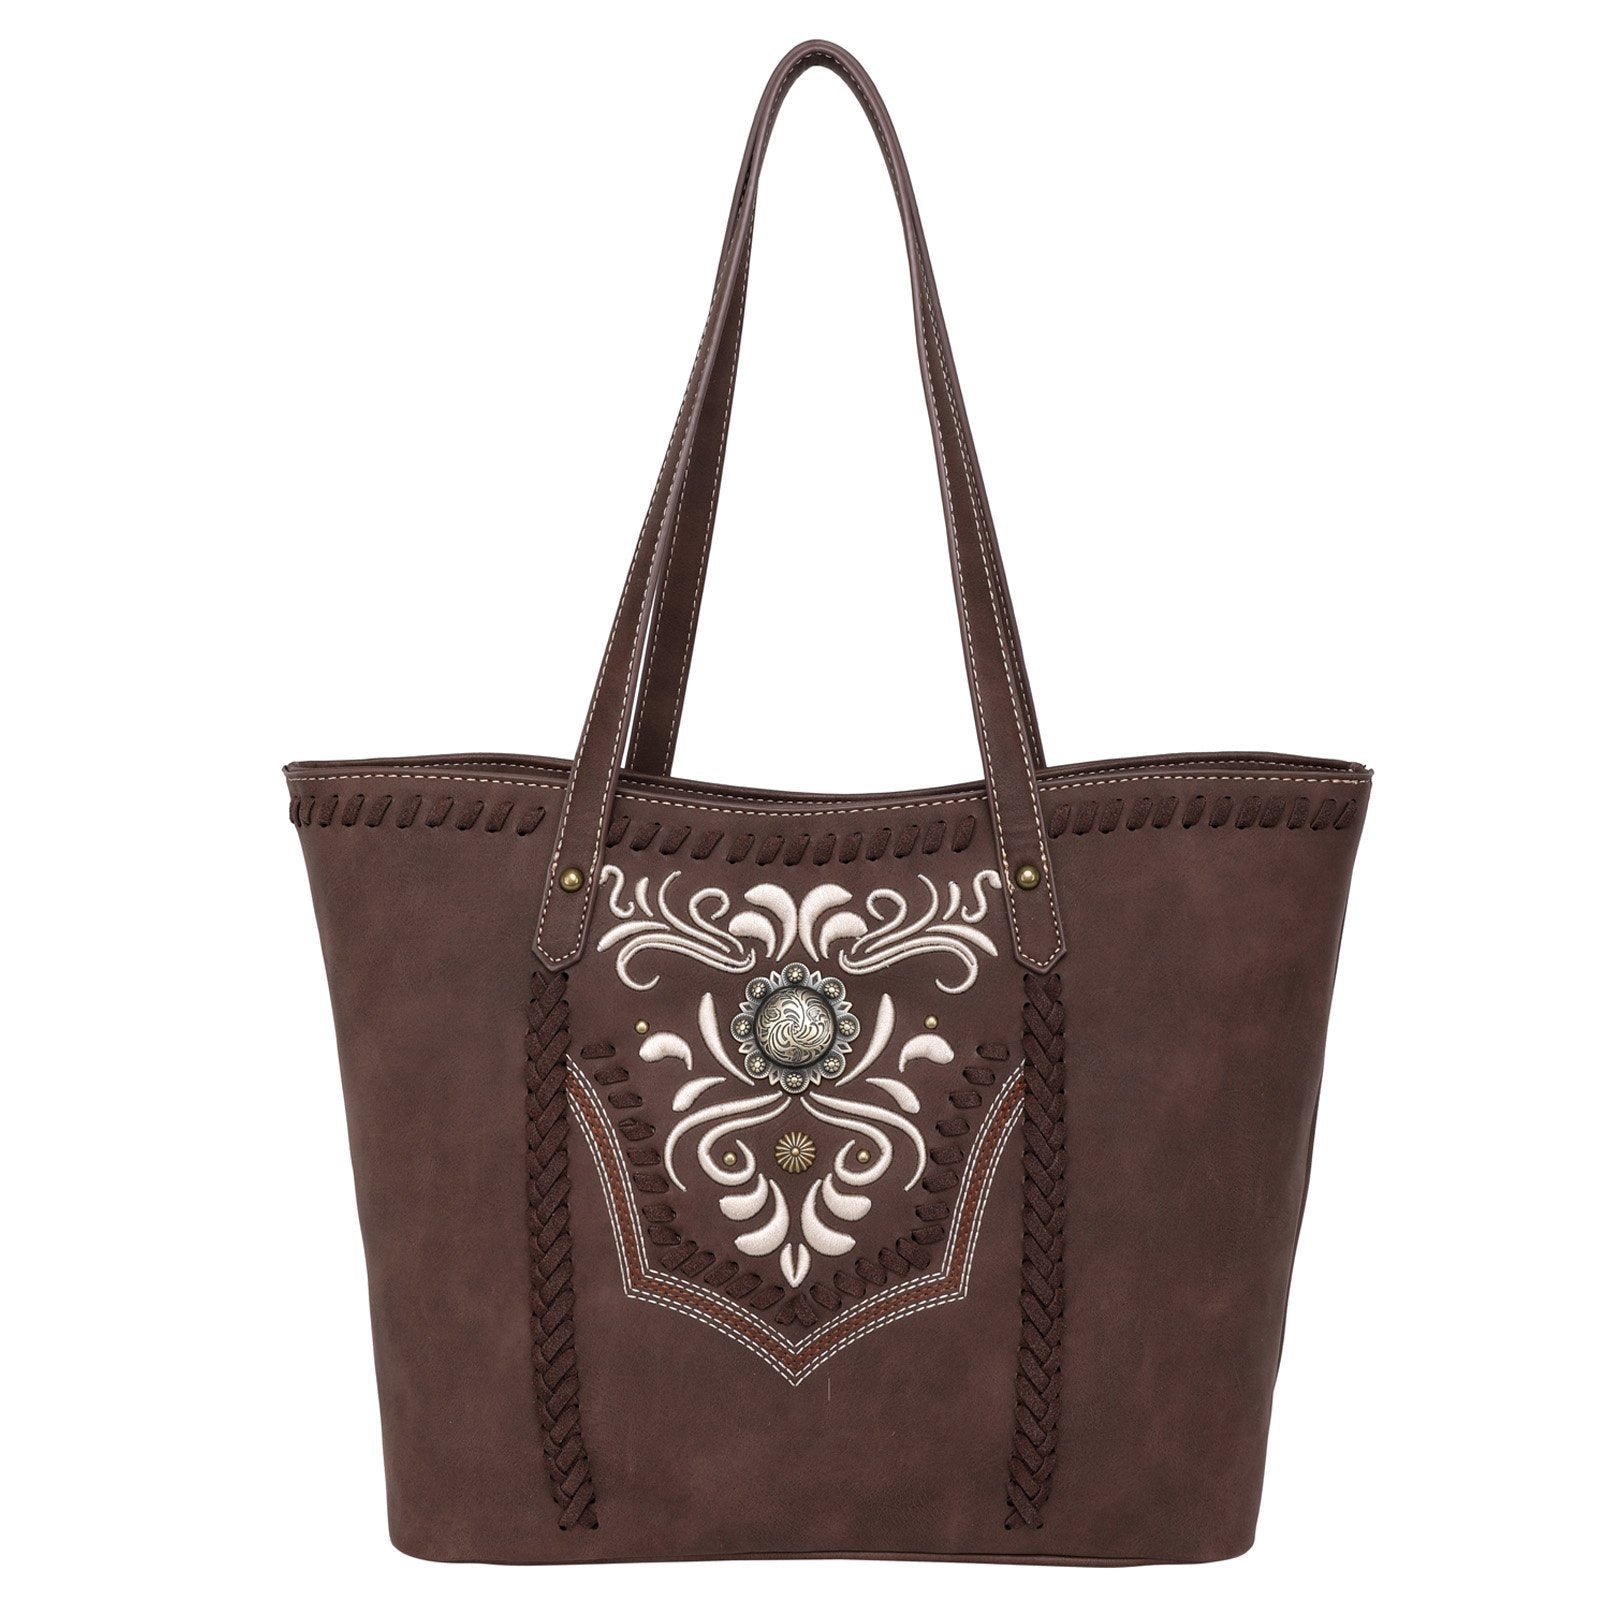 Wrangler Embroidered  Concealed Carry Tote - Cowgirl Wear